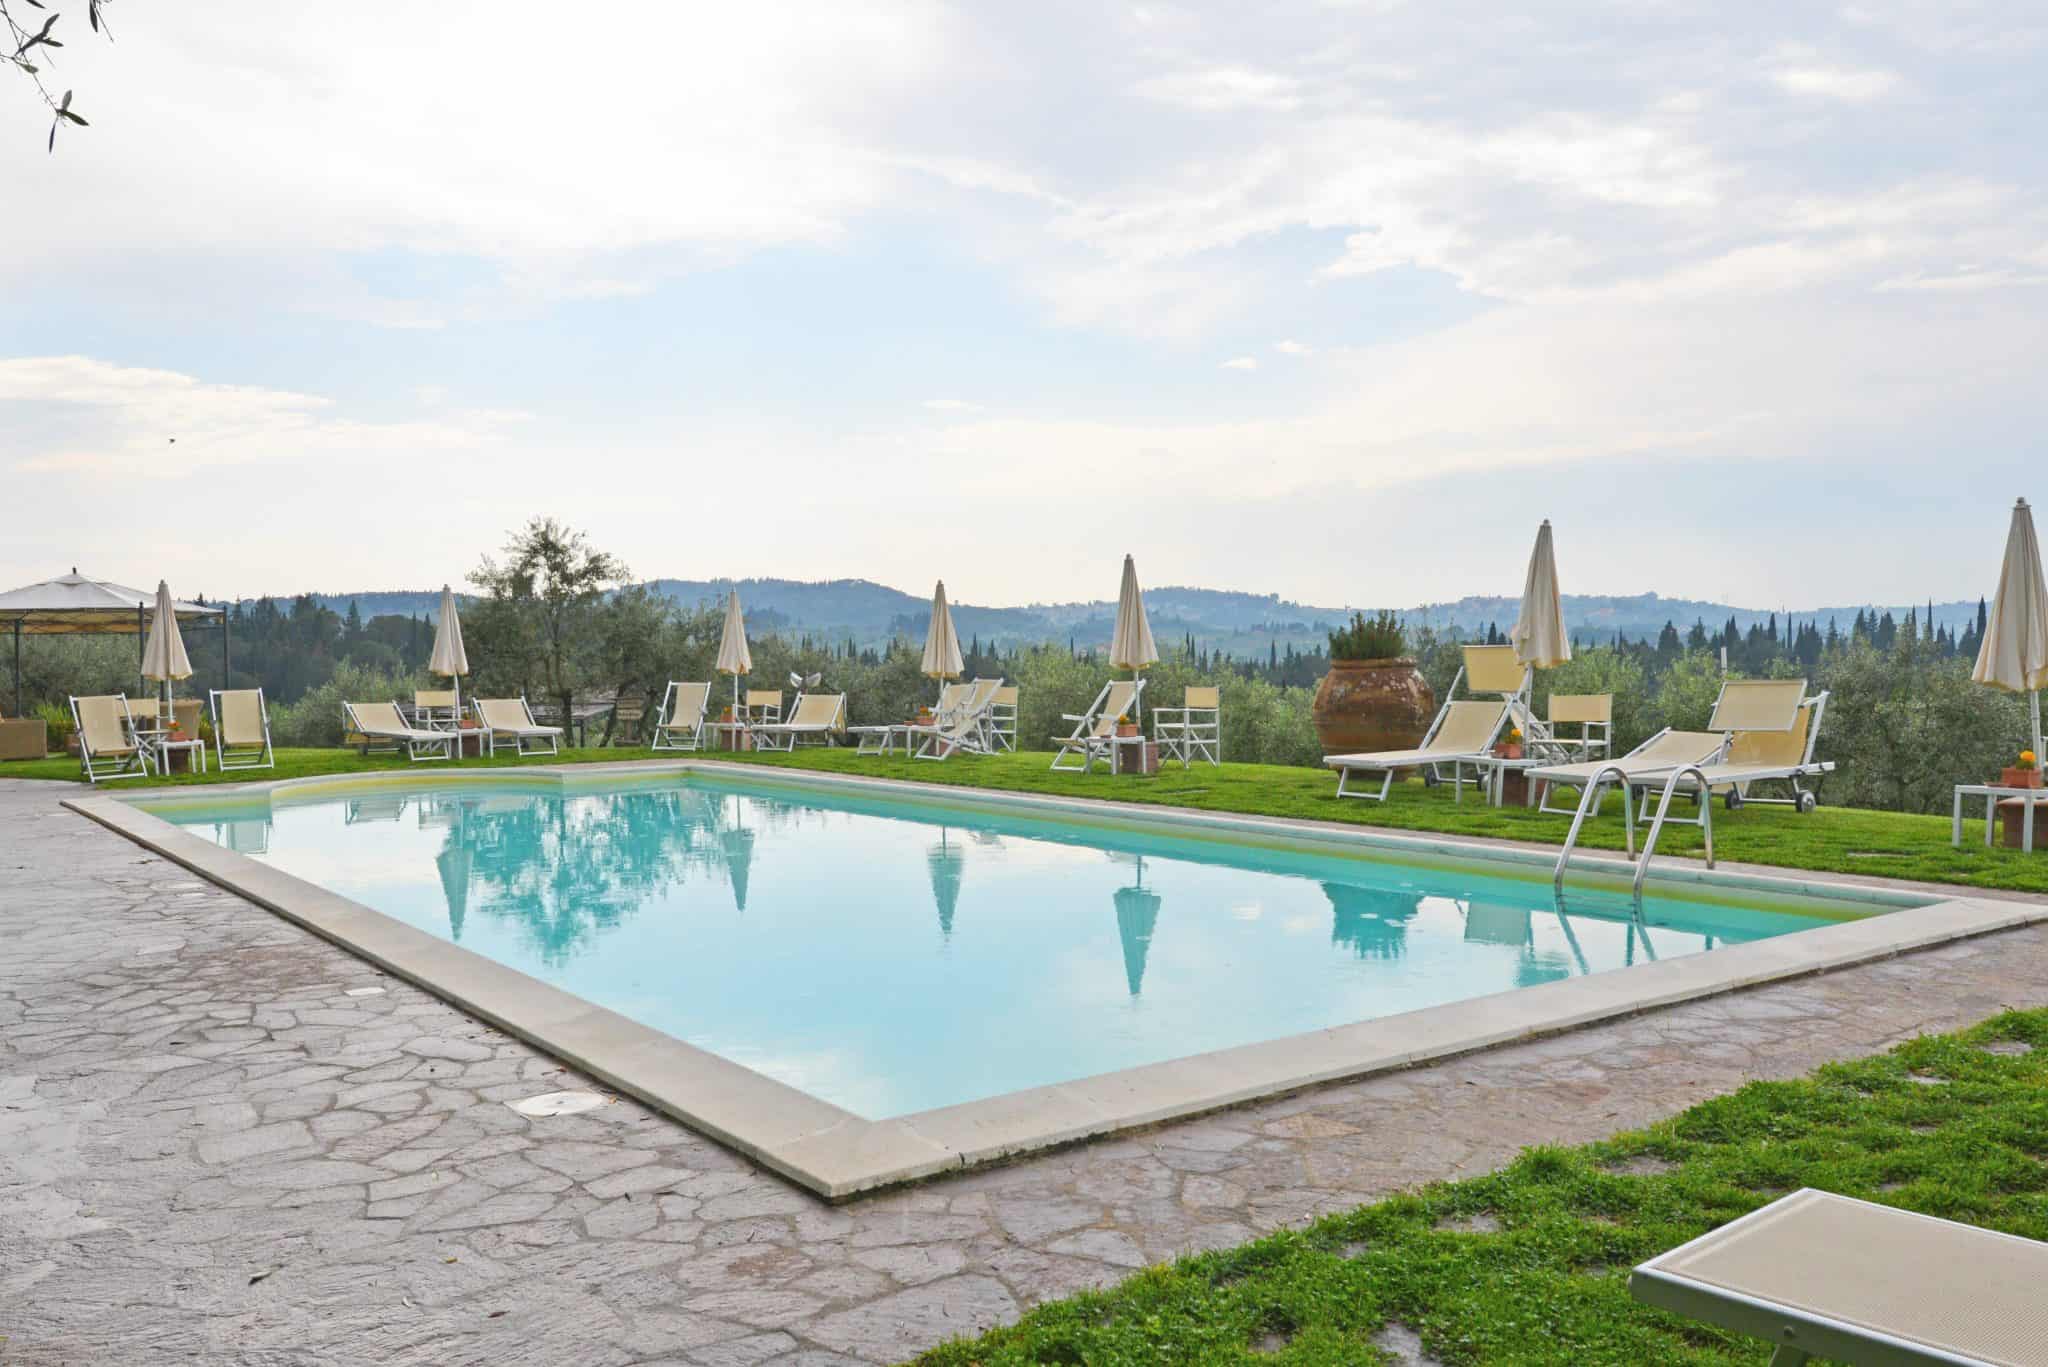 Planning your trip to Tuscany should include a visit to La Presura, a quaint location in Strada in Chianti. The perfect getaway from the bustle of Florence. #chianti #visittuscany www.savoryexperiments.com 